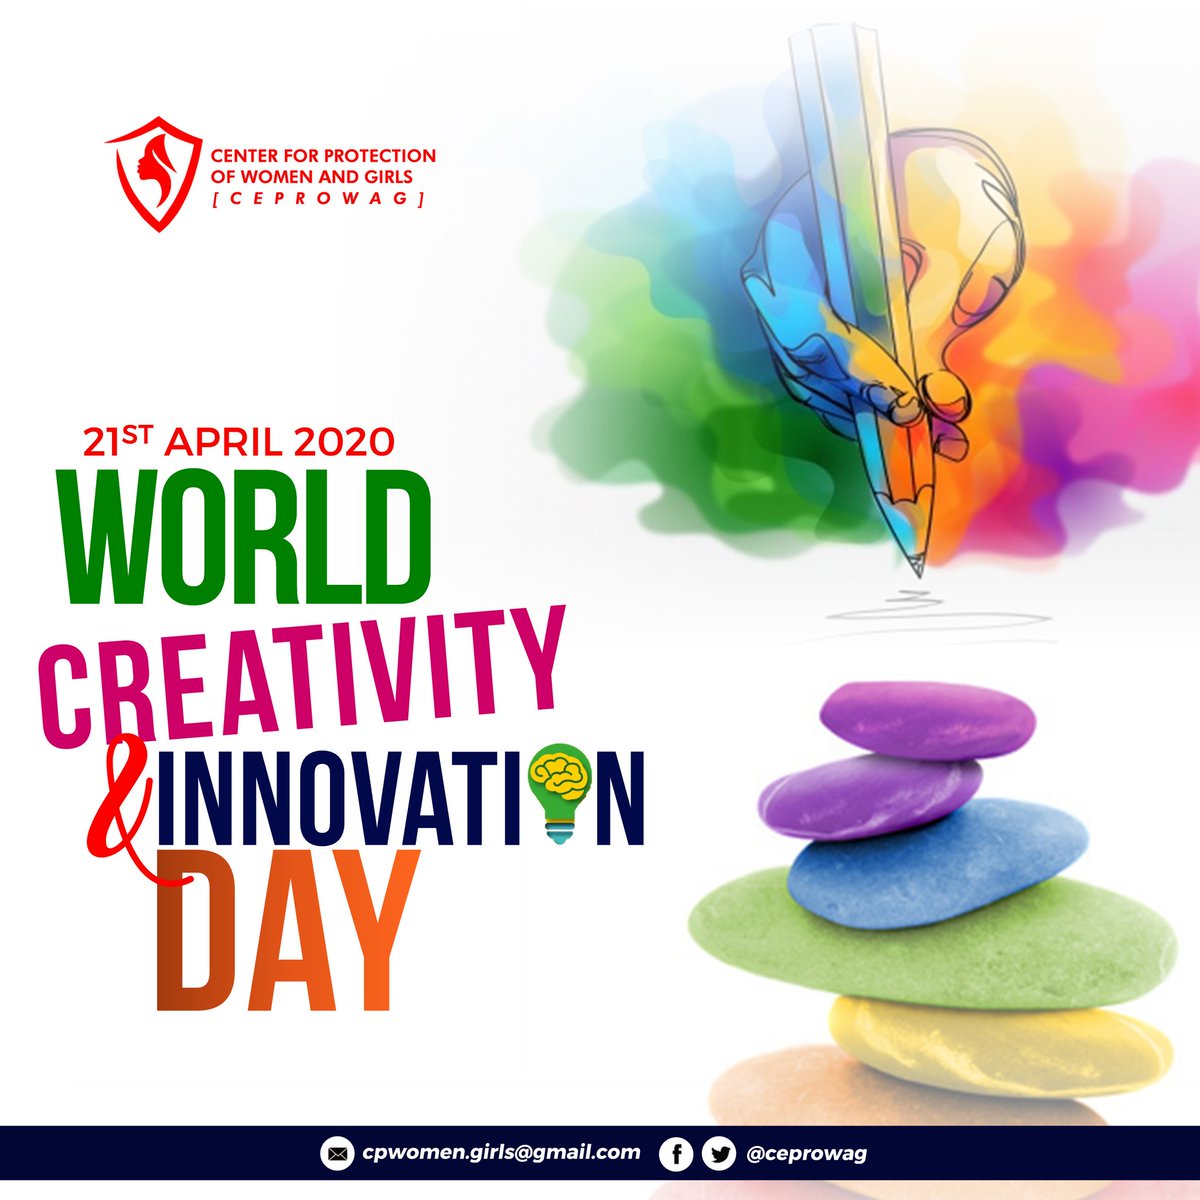 Leveraging Creativity & Innovation is a great way to build our world and provide solutions to the most pressing global problems such as poverty eradication, Protection/Prevention from any form of Violence against women and girls, and many more... #WCID #WCID2020 #CeprowagCares